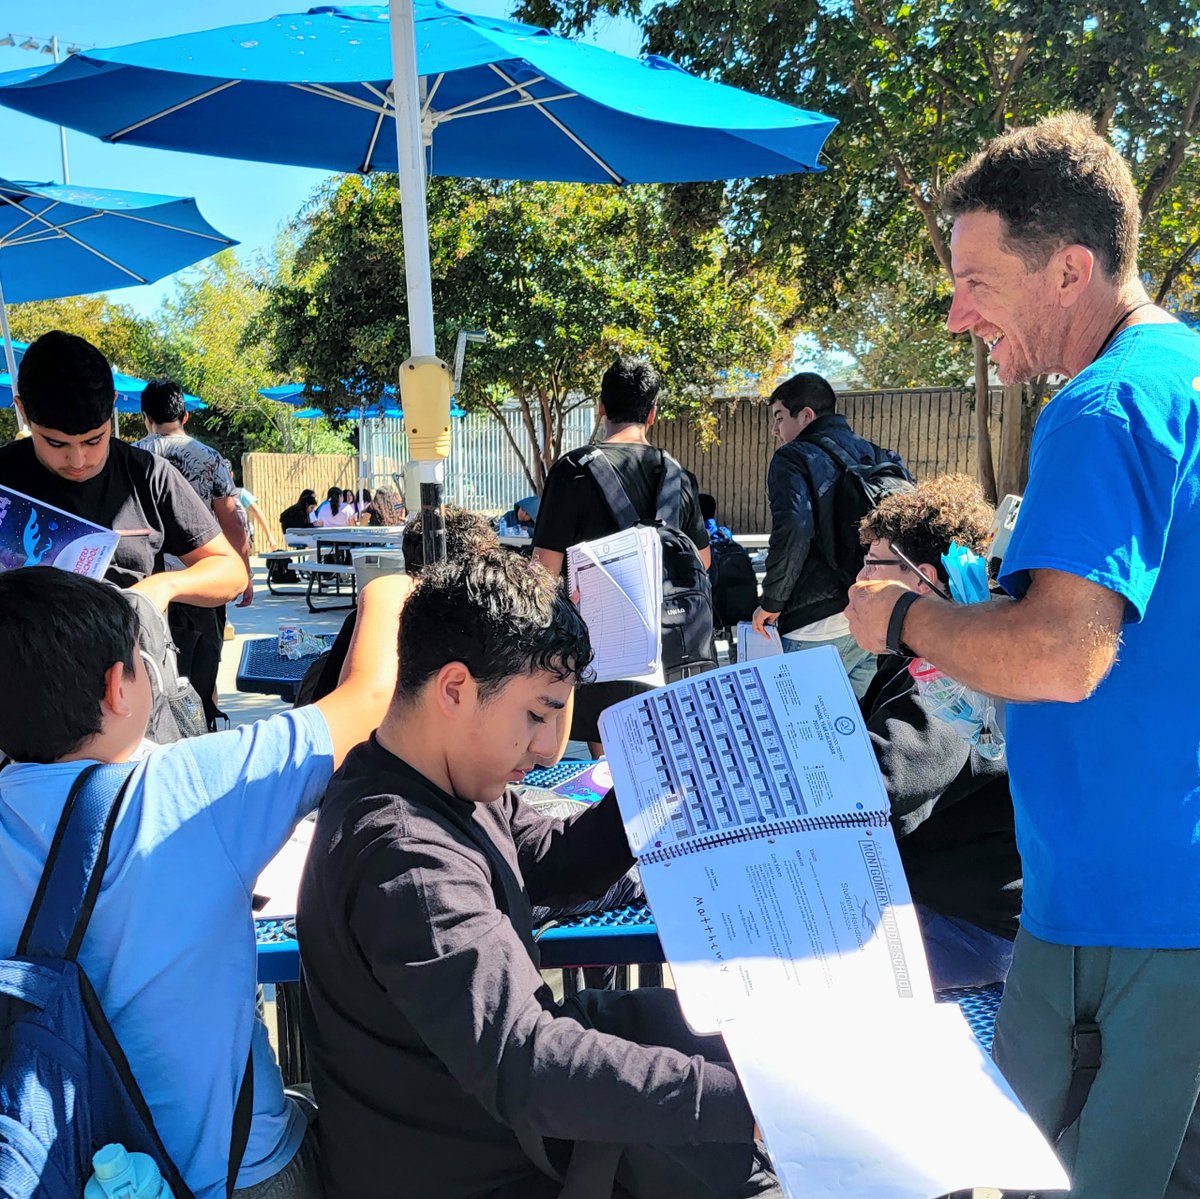 Roadrunners always running over in excitement to show @principalhurlbert how they use their planners to stay on track with their studies. Great job, MMS! #THISisMMS #TheRoadrunnerWay #YouBelong #MMSRoadrunners #MMSPride #YouBelongMMS #YouBelongCV @cajonvalleyusd